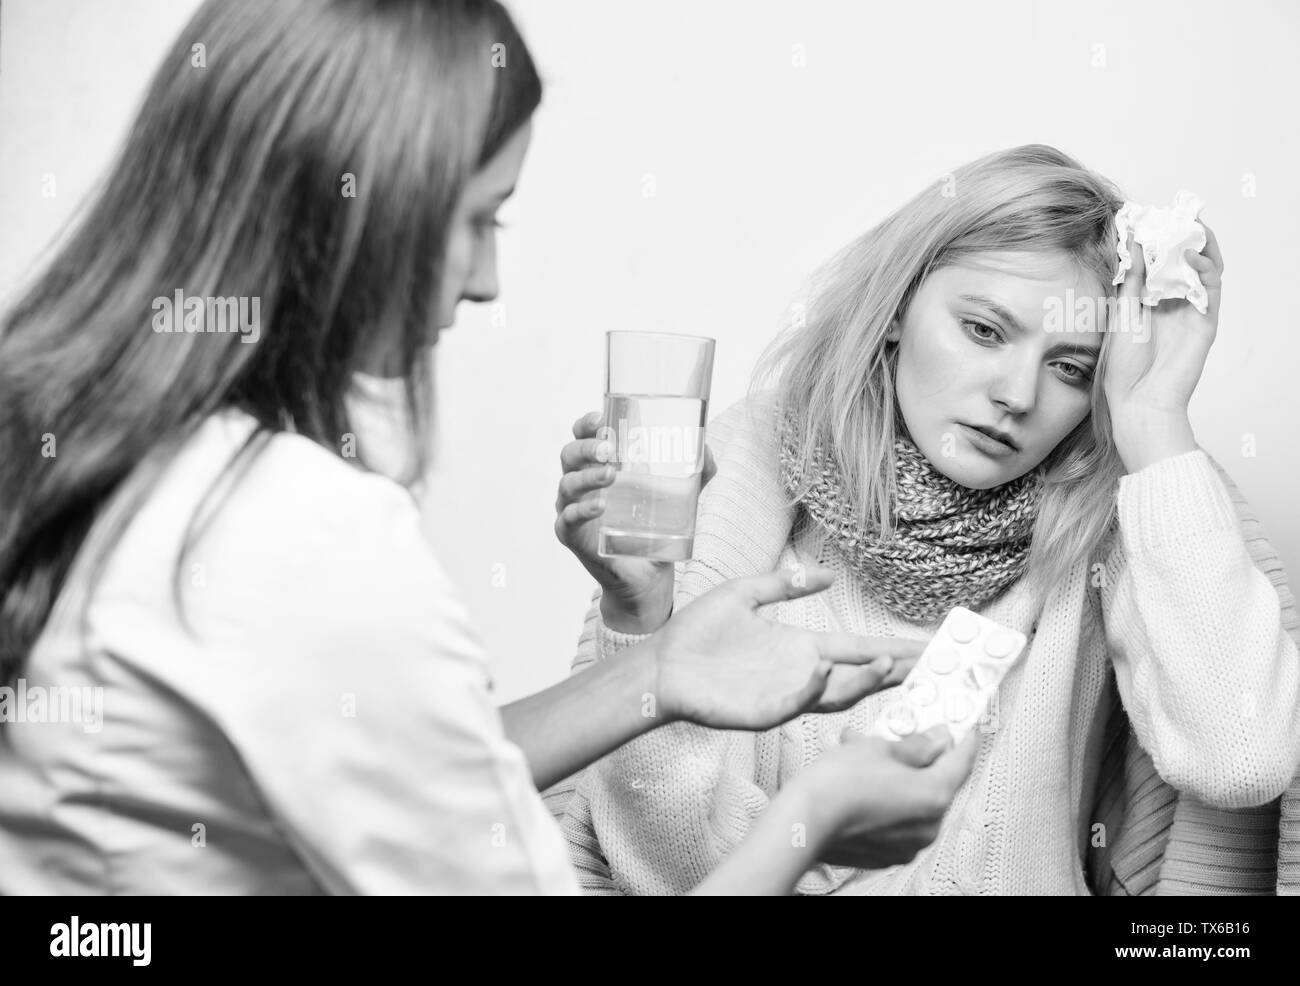 Woman consult with doctor. Girl in scarf hold tissue while doctor offer treatment. Cold and flu remedies. Tips how to get rid of cold. Recognize symptoms of cold. Remedies should help beat cold fast. Stock Photo